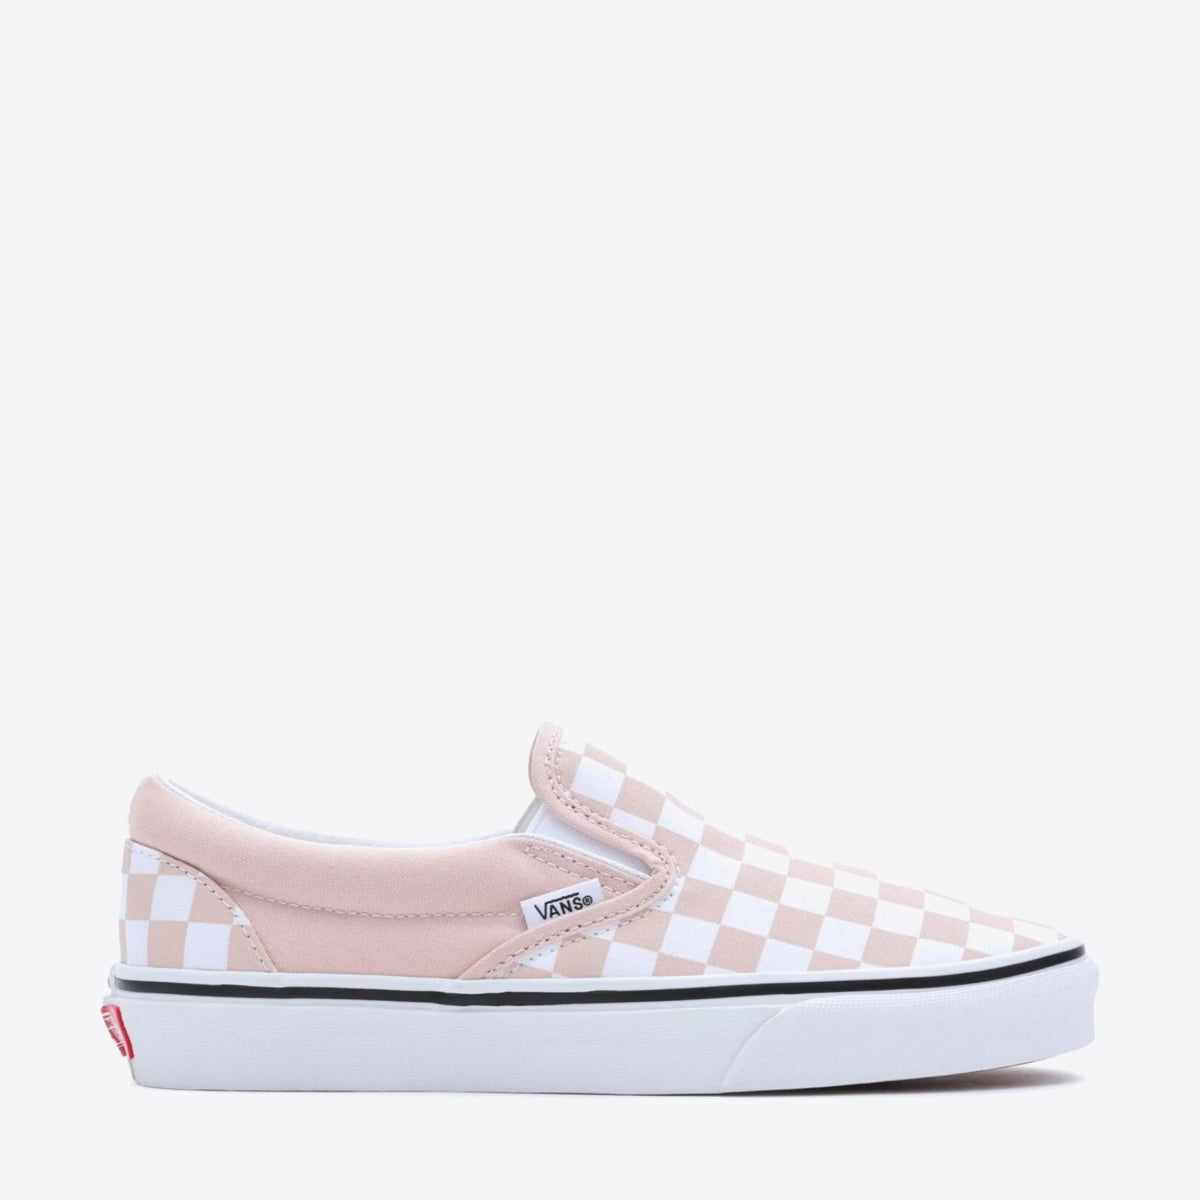 VANS Classic Slip-On Color Theory Checkerboard - Women's Rose Smoke - Image 1